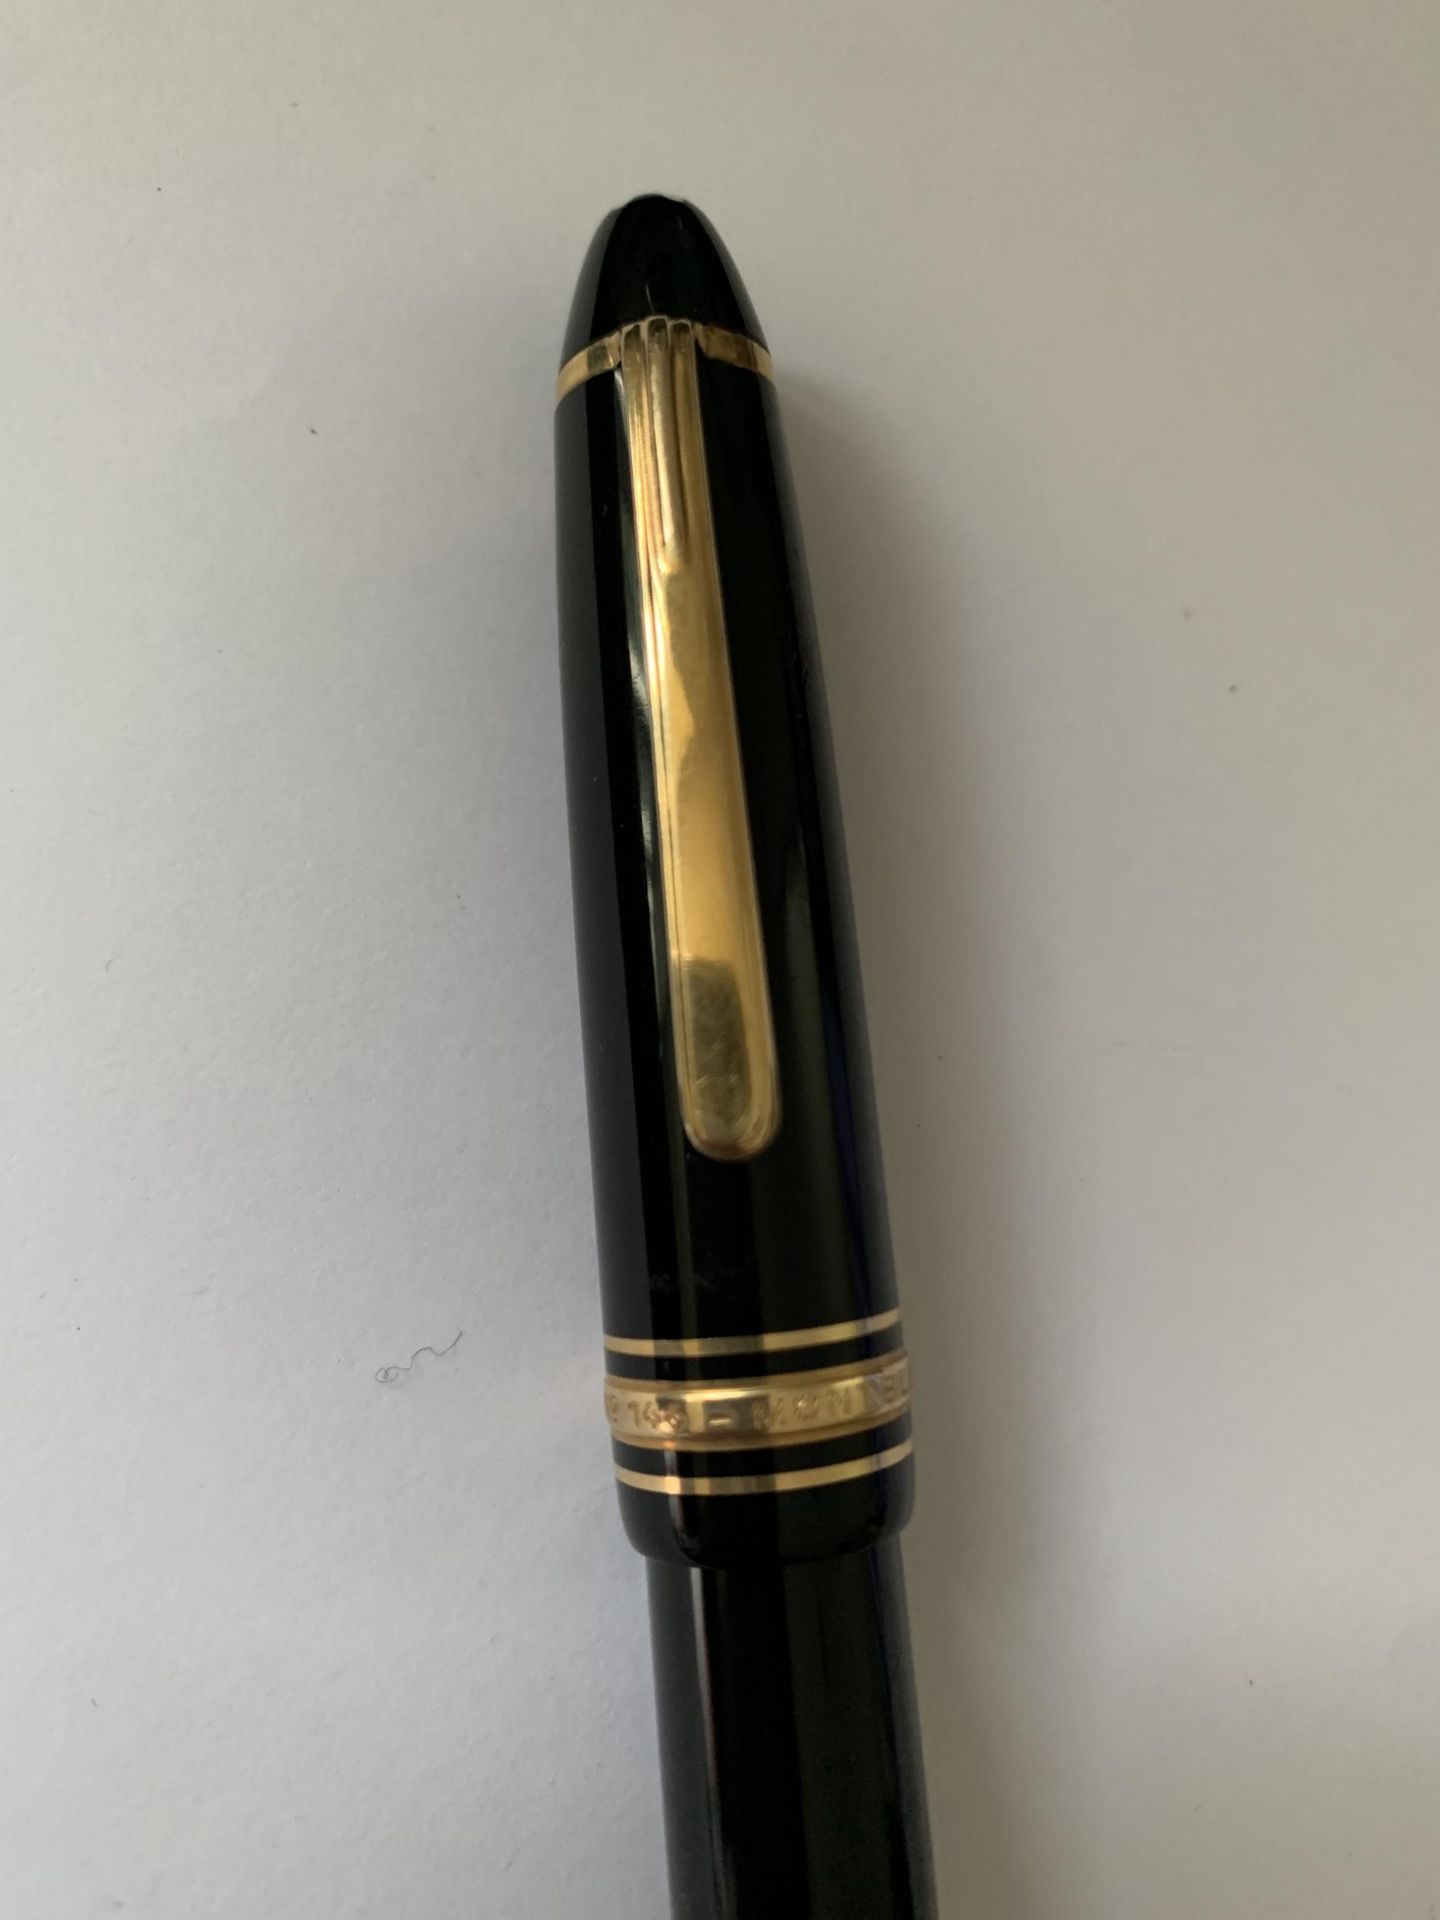 A MONT BLANC MEISTERSTUCK GOLD COATED LE GRAND FOUNTAIN PEN WITH 18 CARAT GOLD MEDIUM NIB - Image 2 of 8